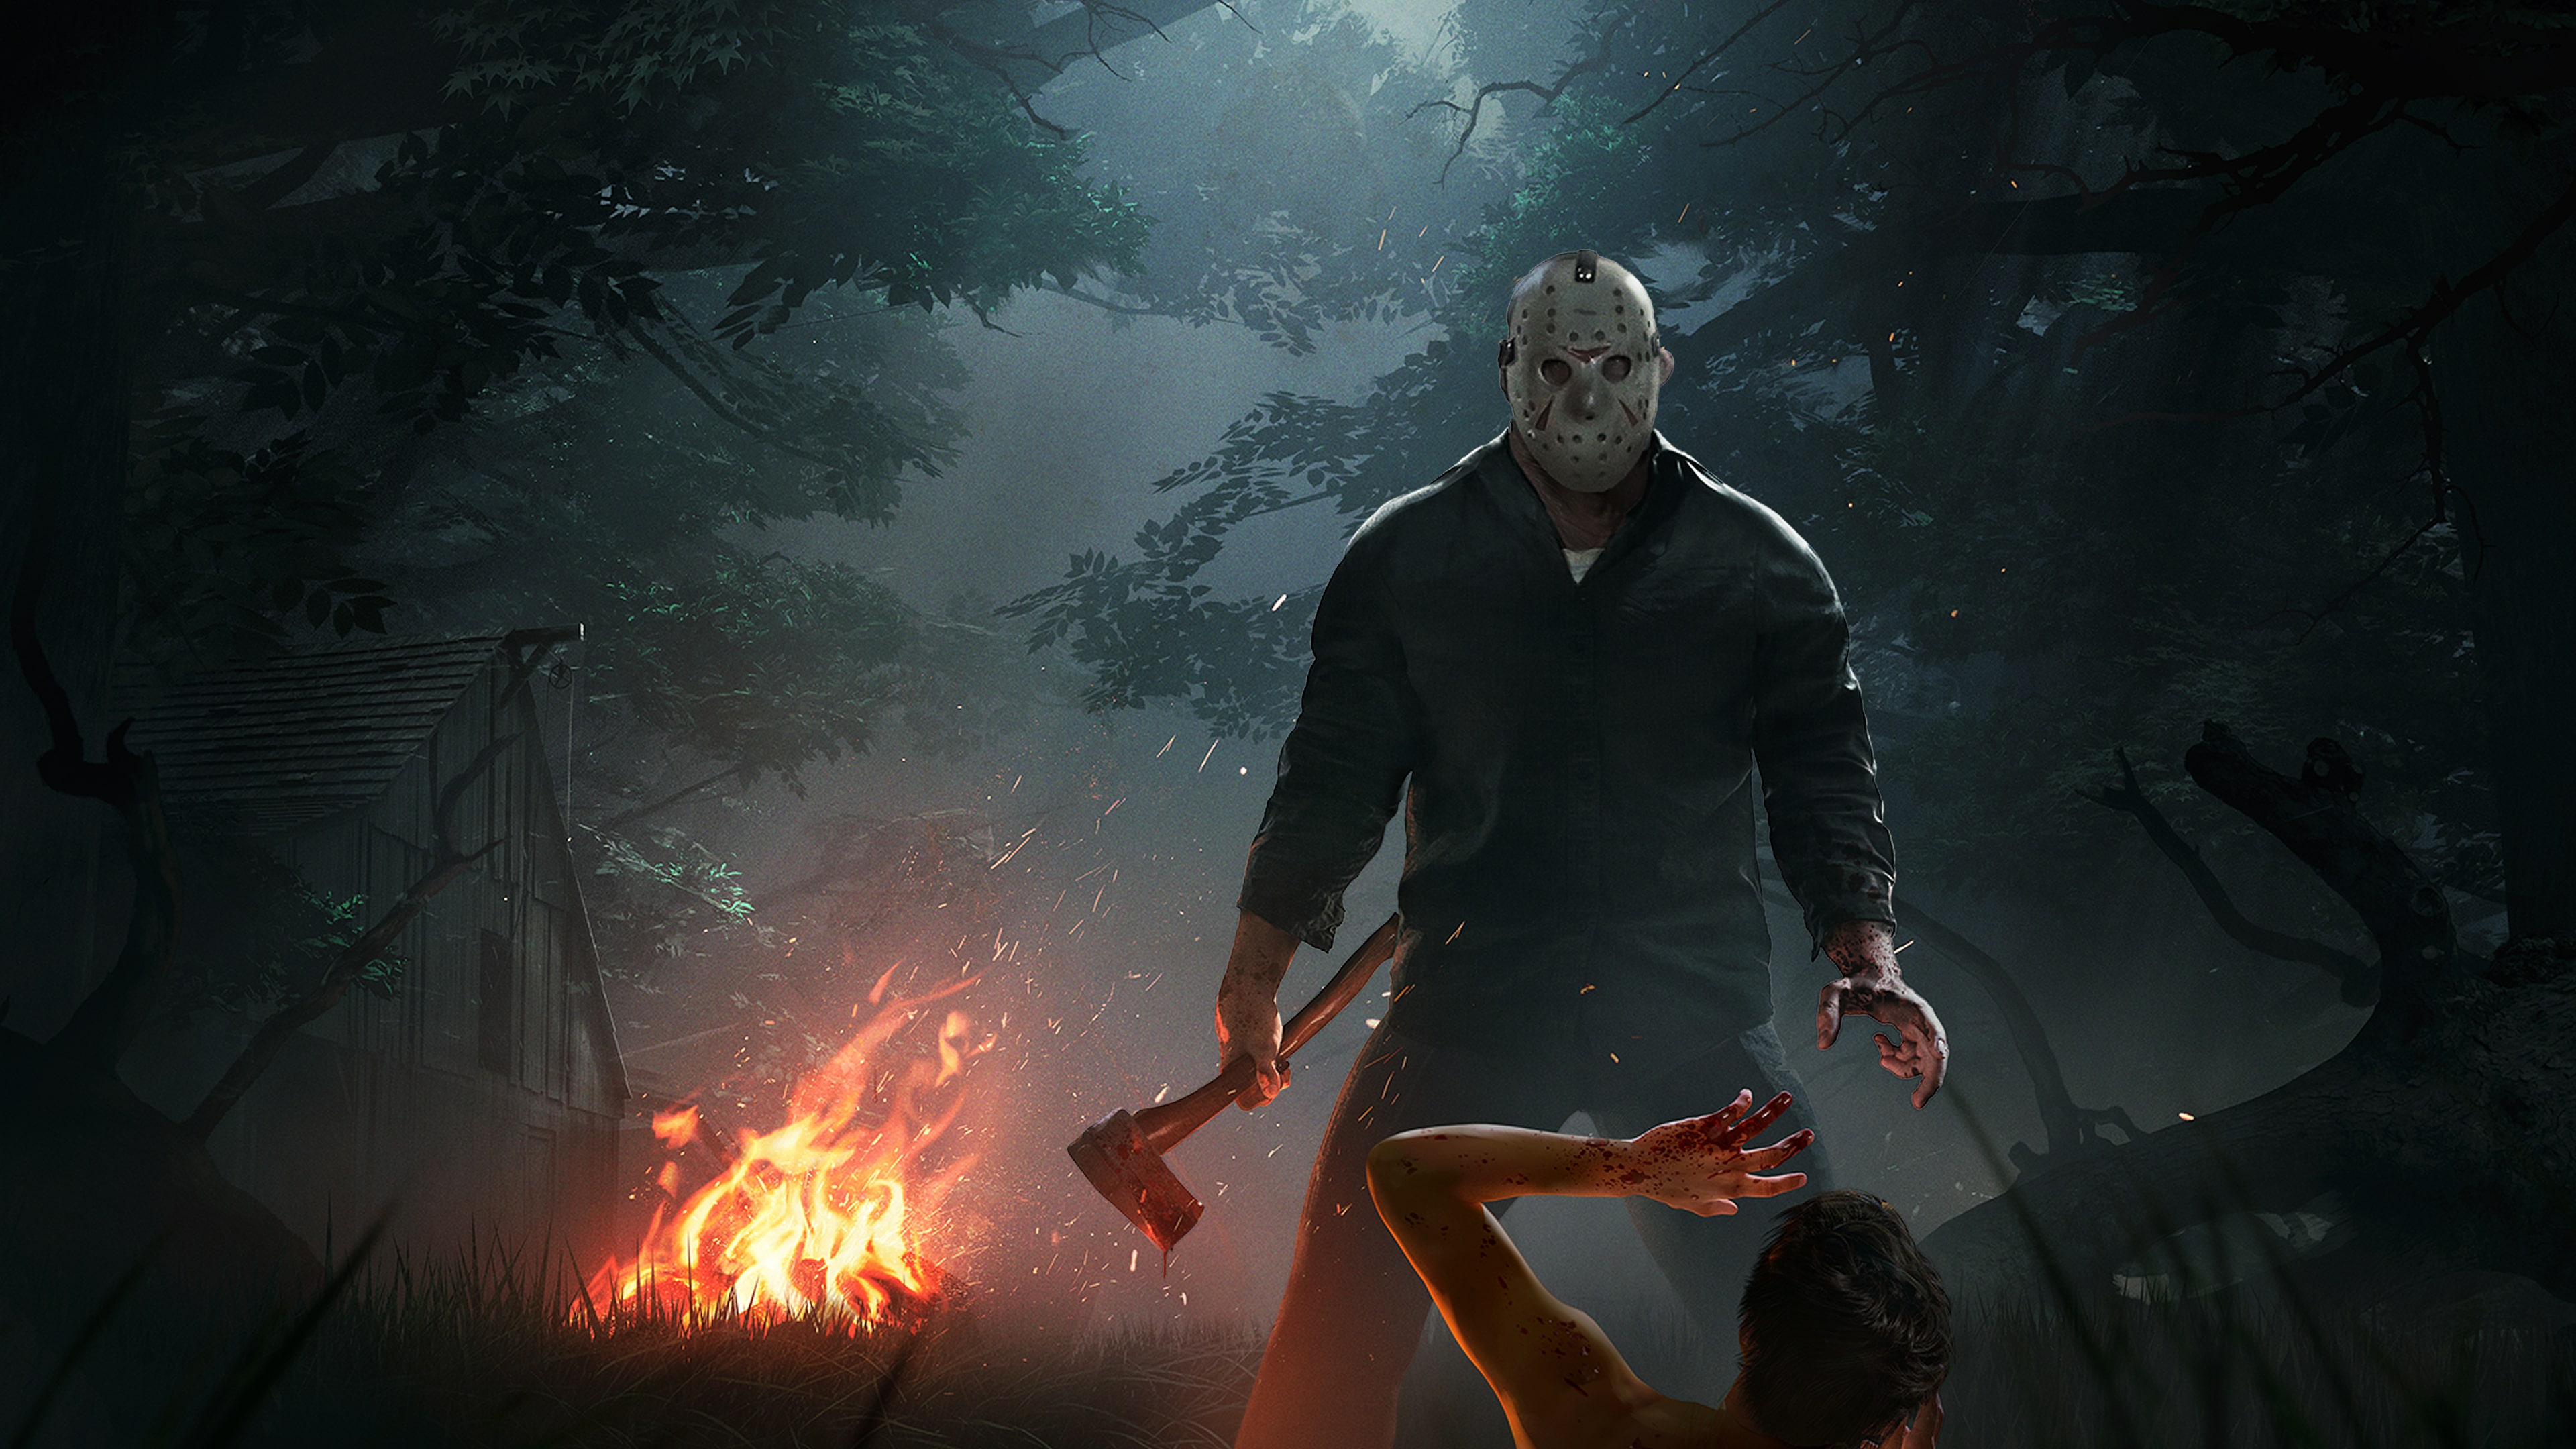 friday the 13th game pc gratis